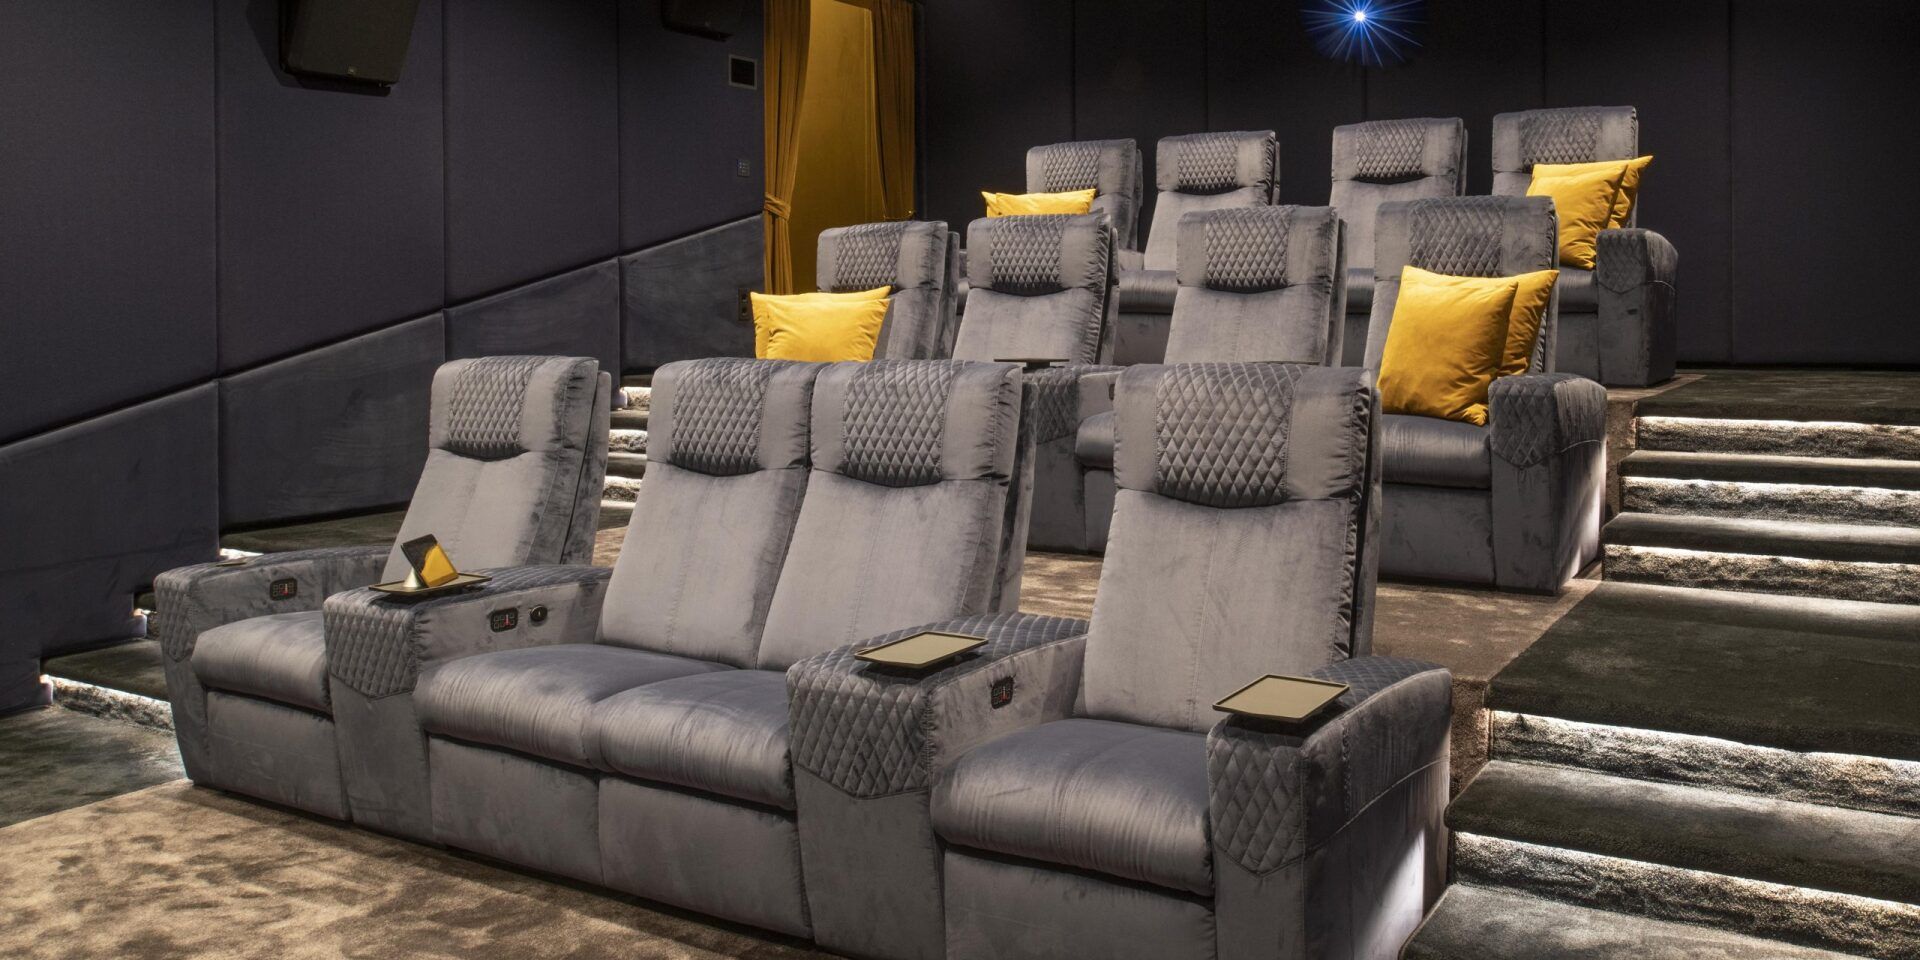 A movie theater with a lot of seats and a couch.